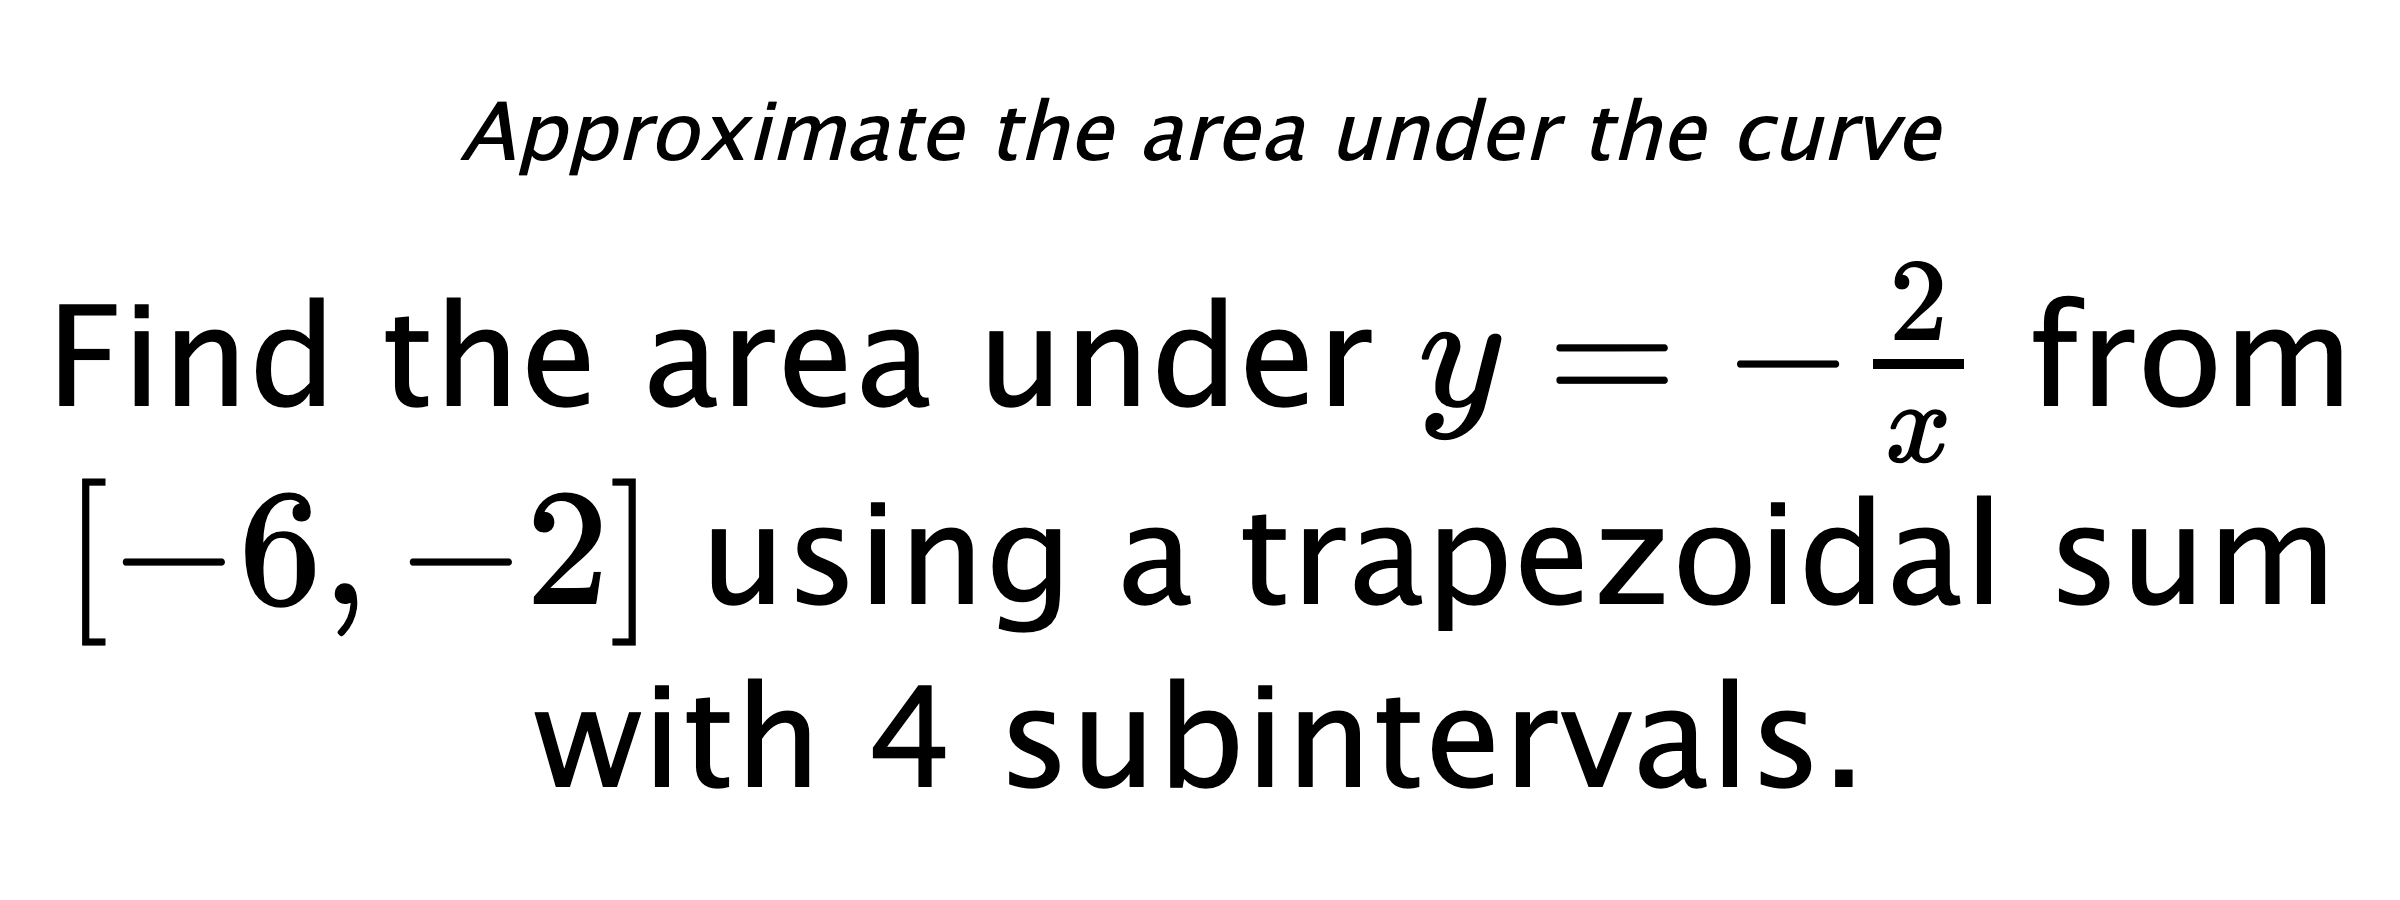 Approximate the area under the curve Find the area under $ y=-\frac{2}{x} $ from $ [-6,-2] $ using a trapezoidal sum with 4 subintervals.